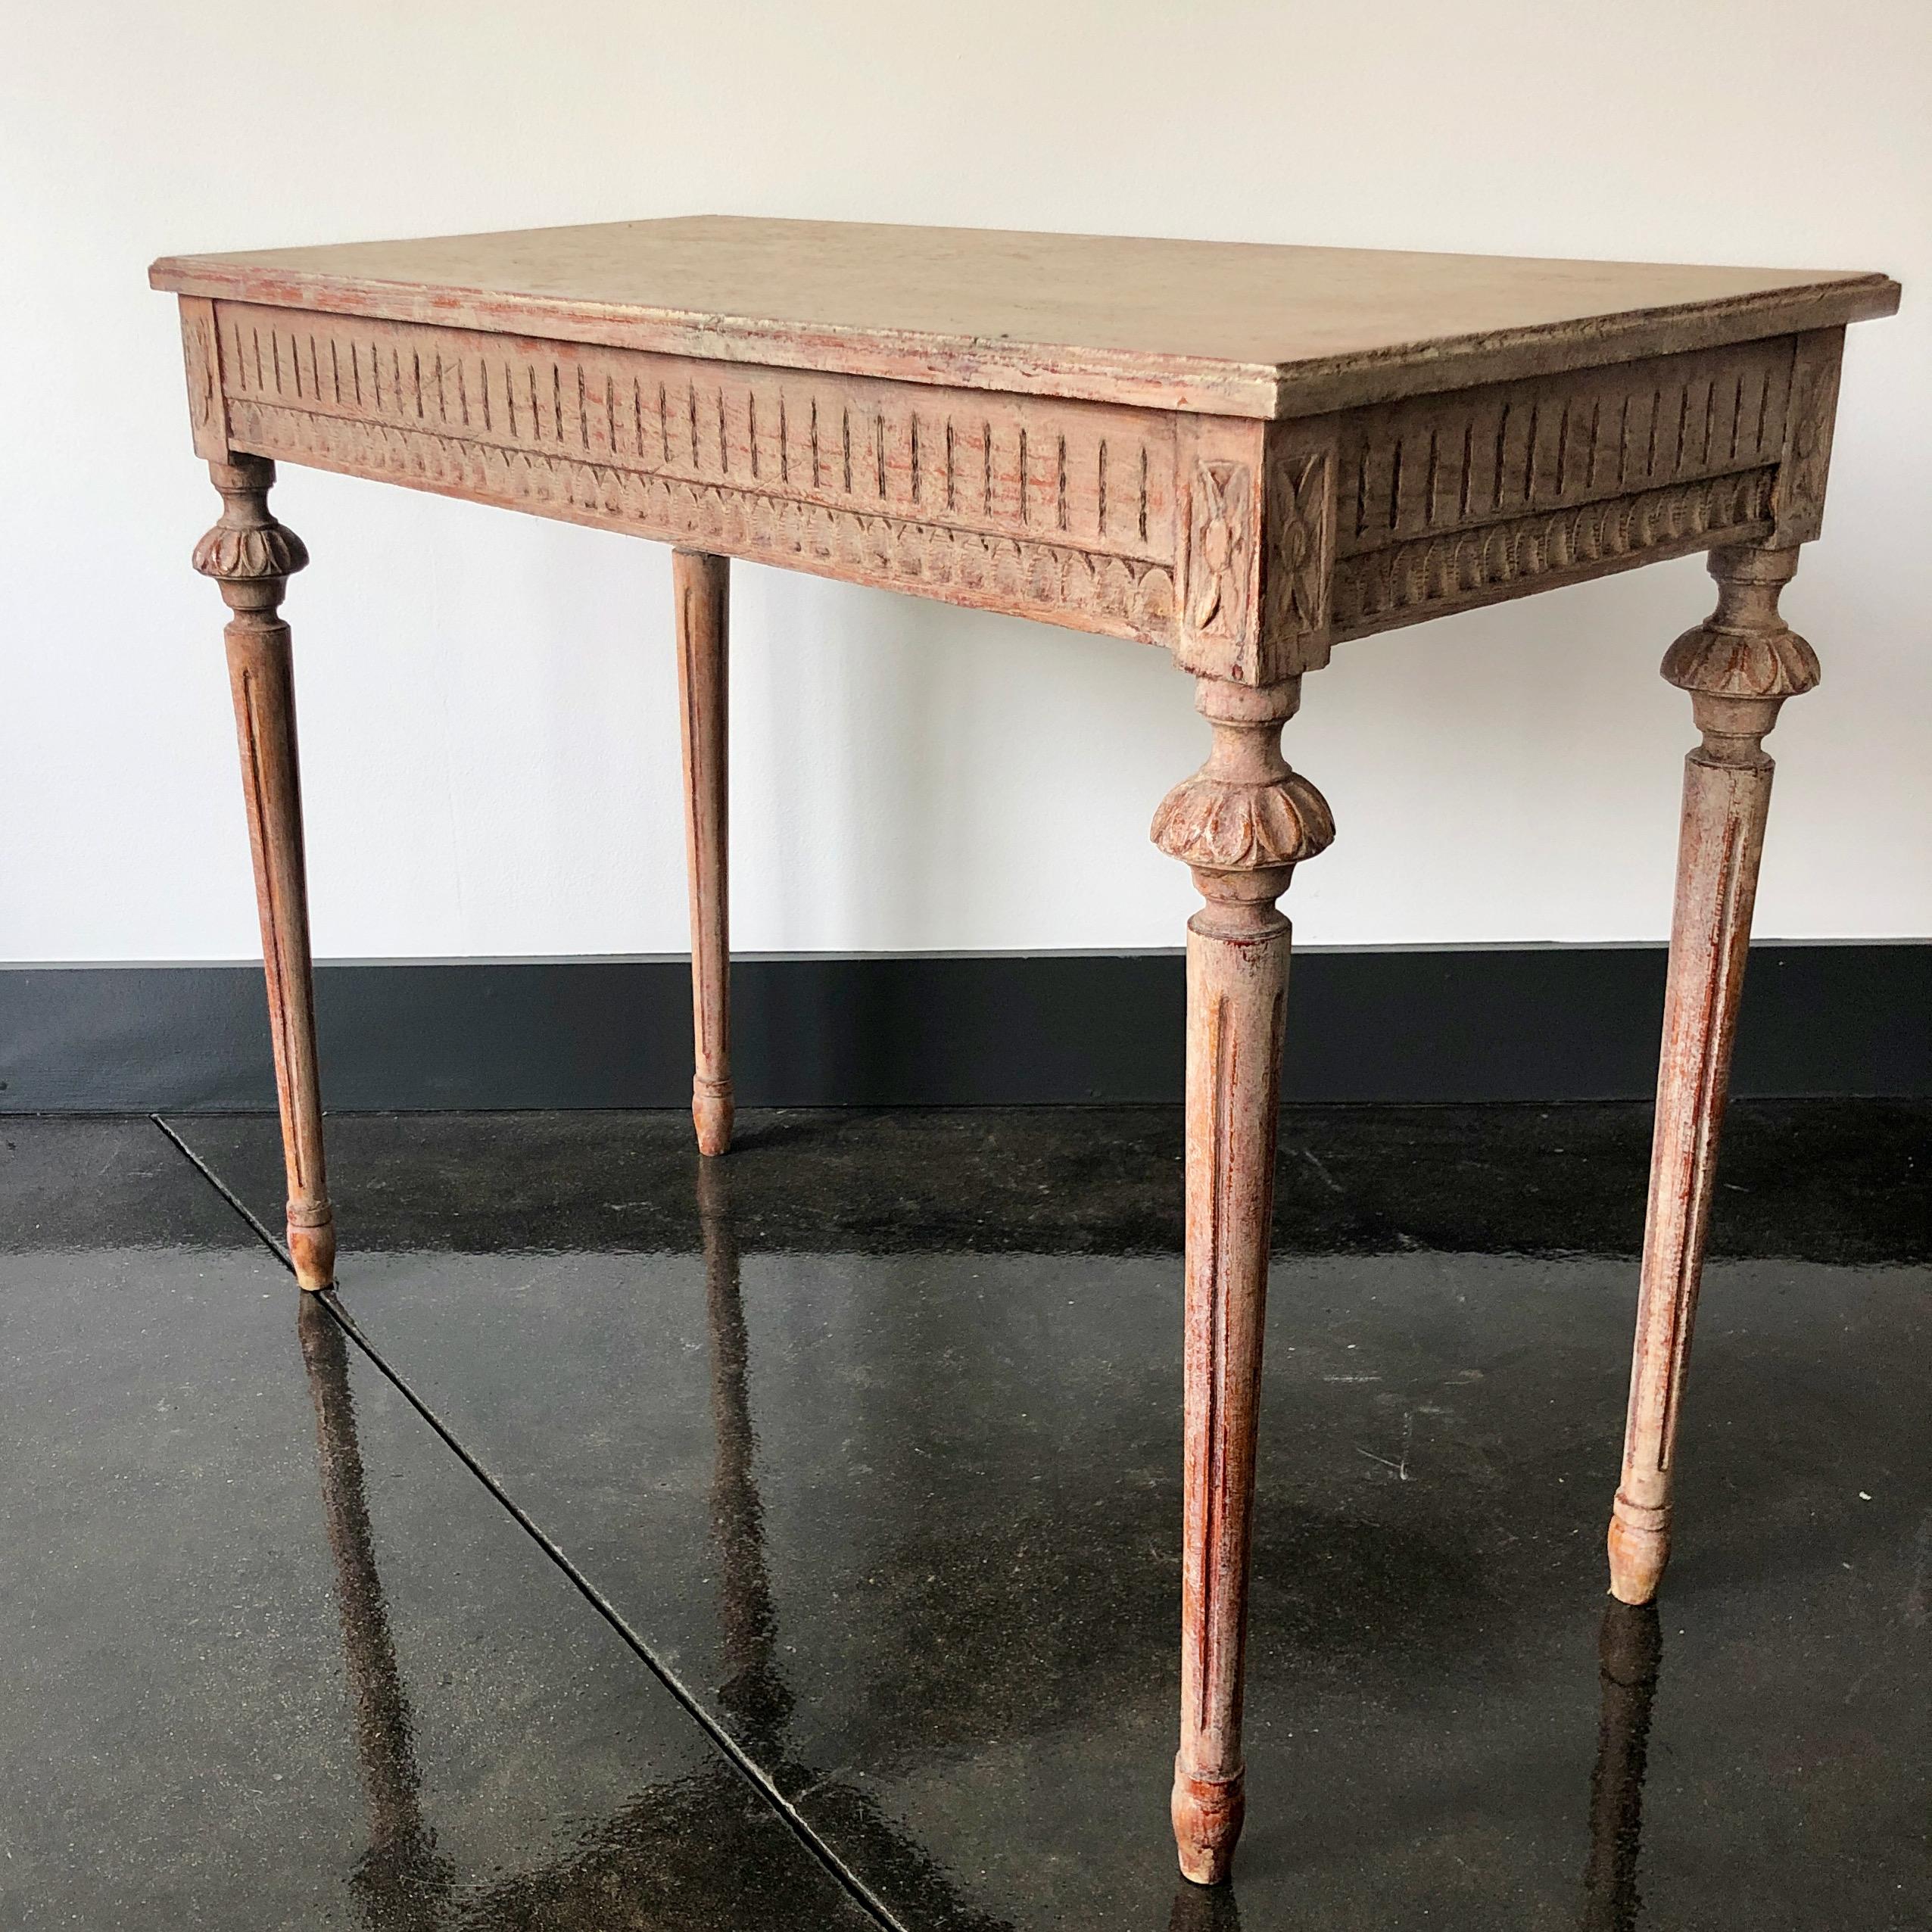 Hand-Carved Early 19th Century Swedish Gustavian Period Freestanding Console Table